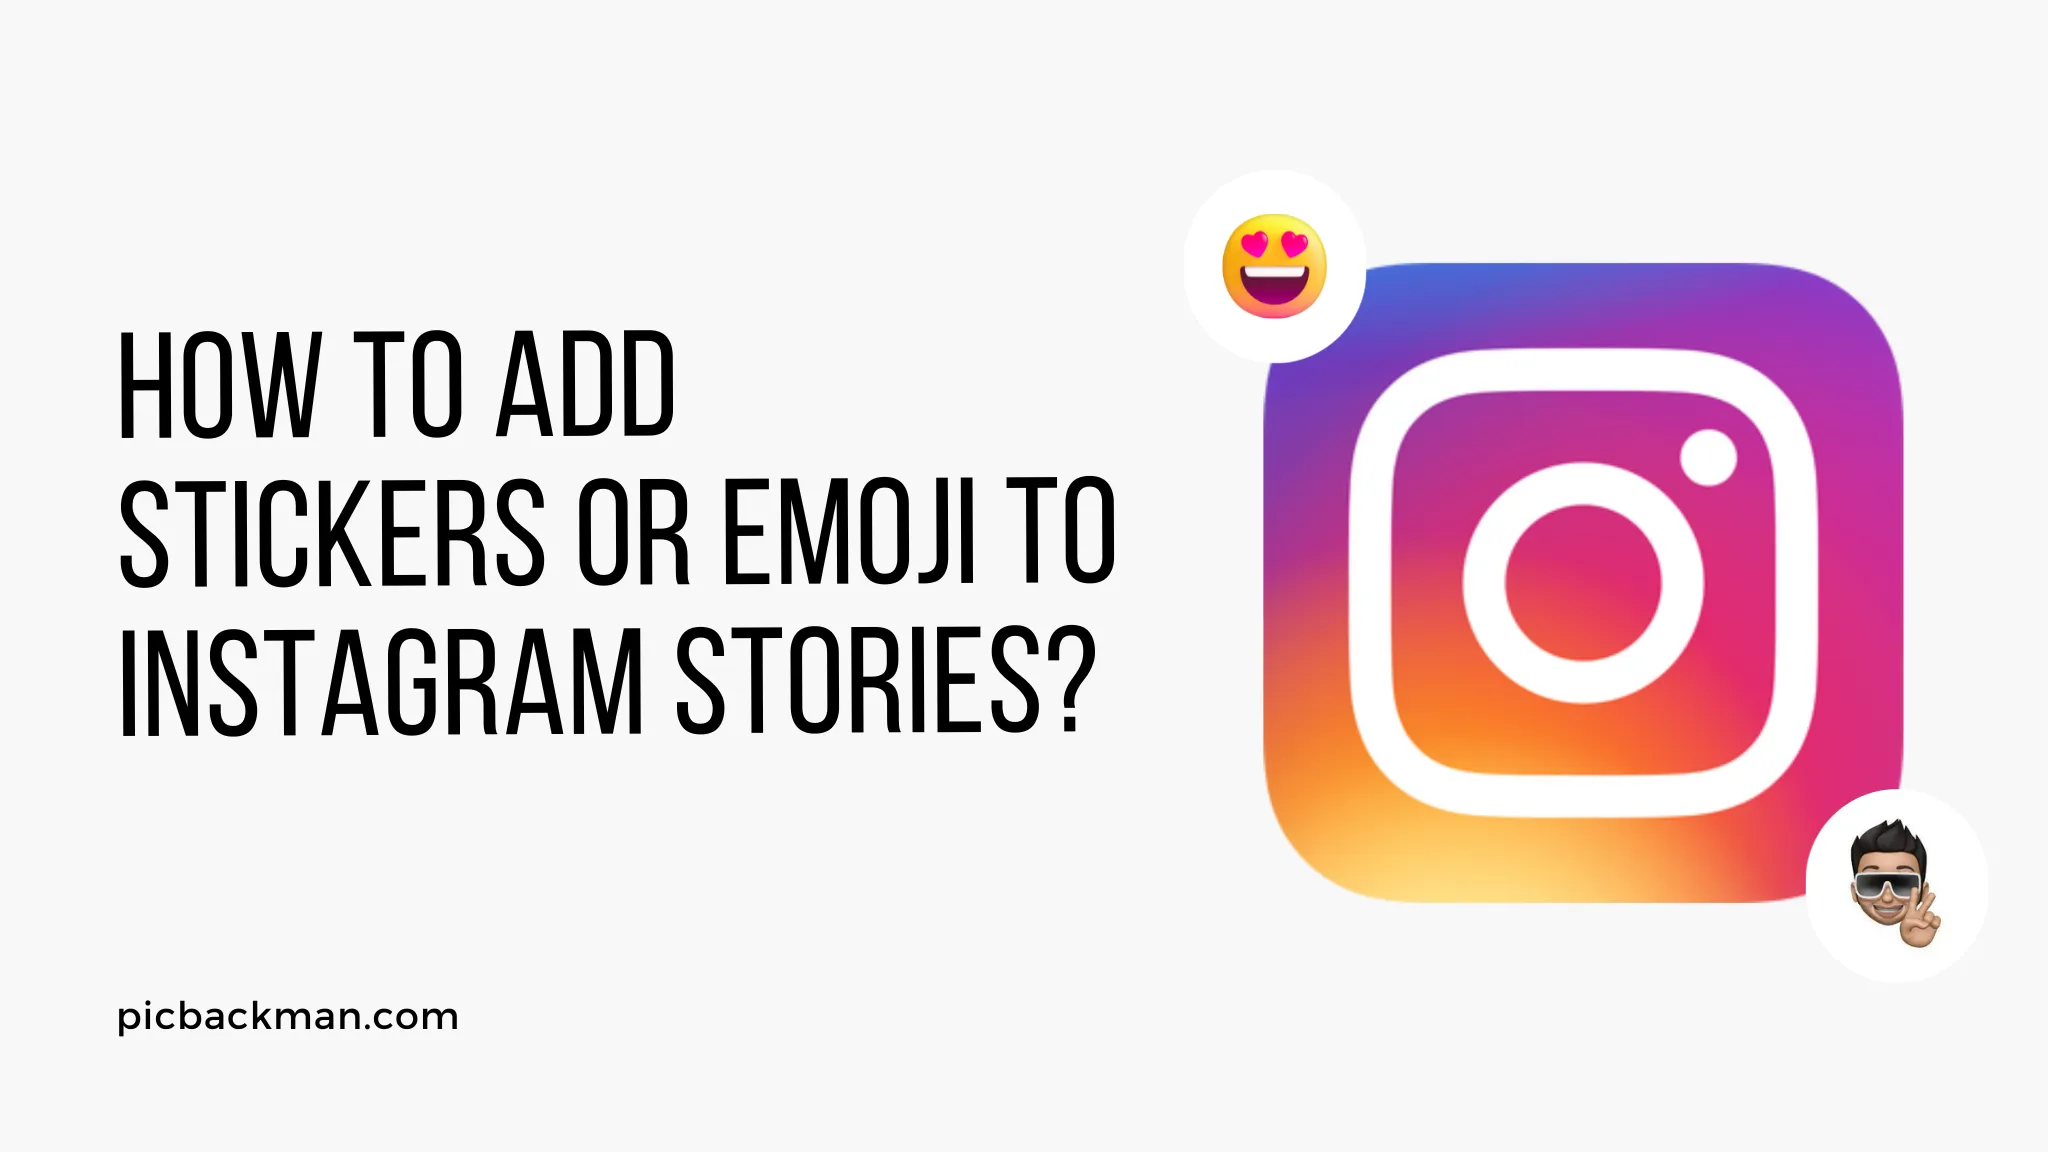 How to Add Stickers or Emoji to Instagram Stories?